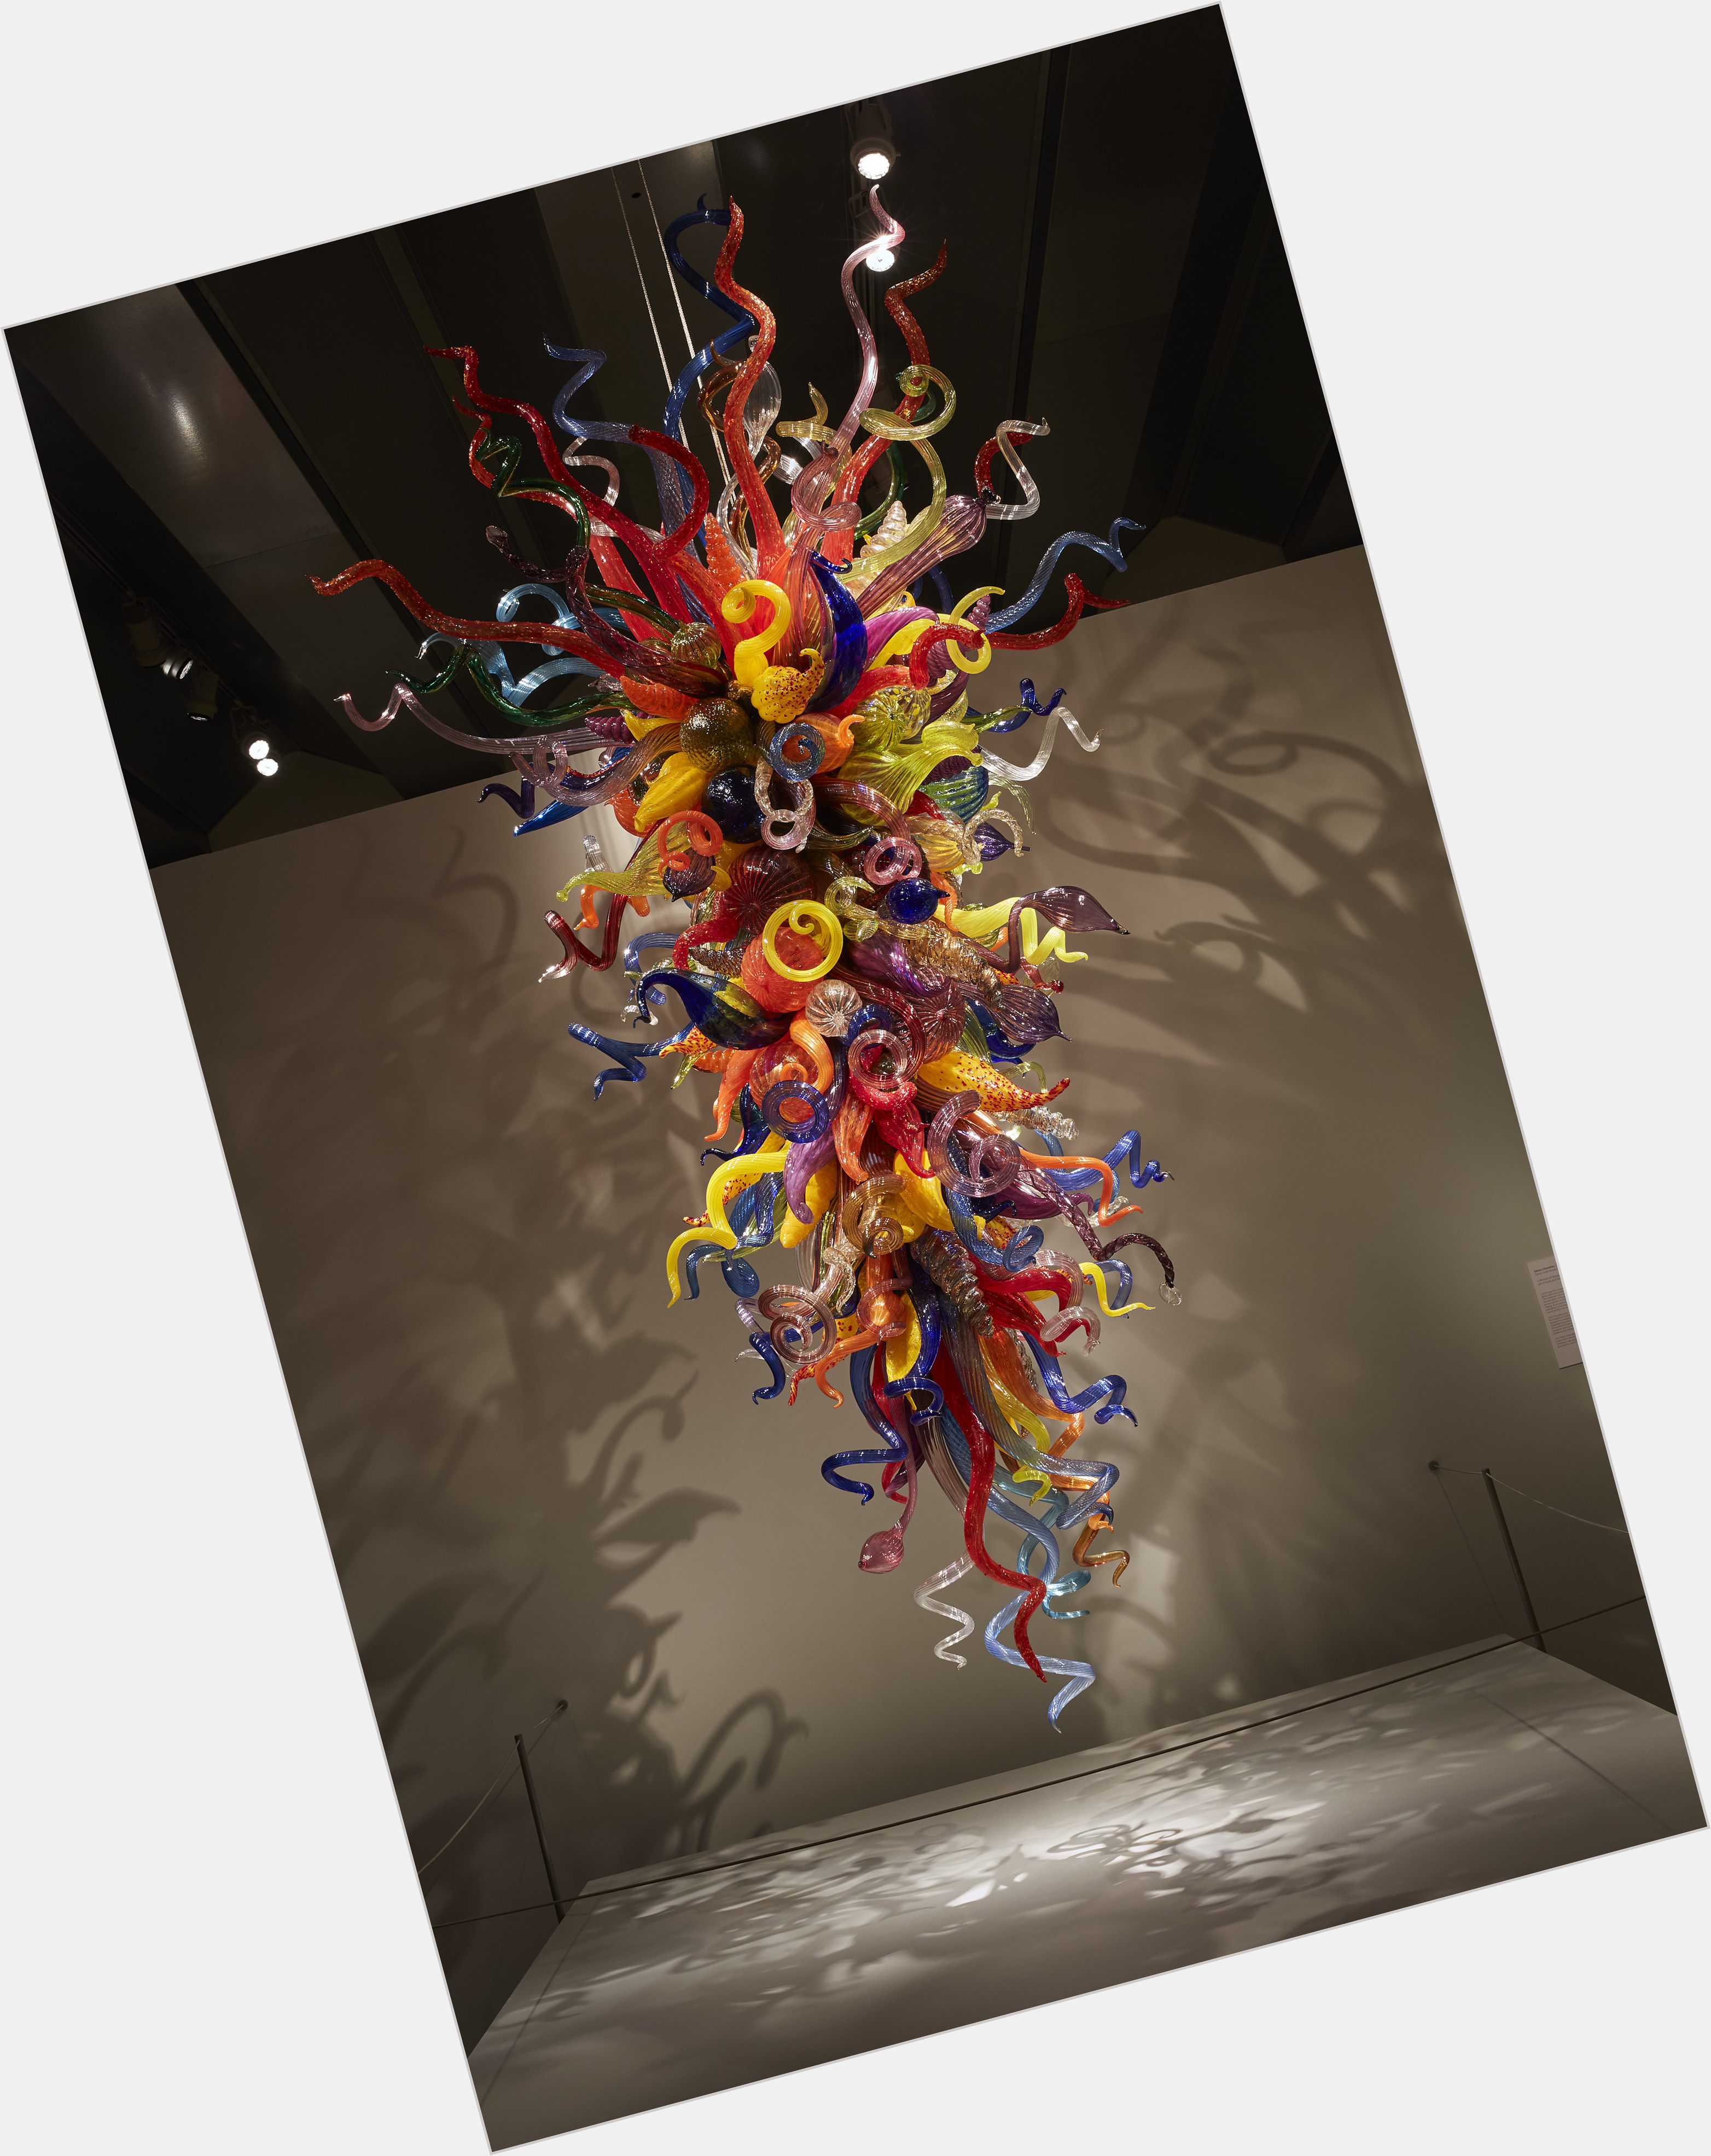 Https://fanpagepress.net/m/D/dale Chihuly Paintings 2